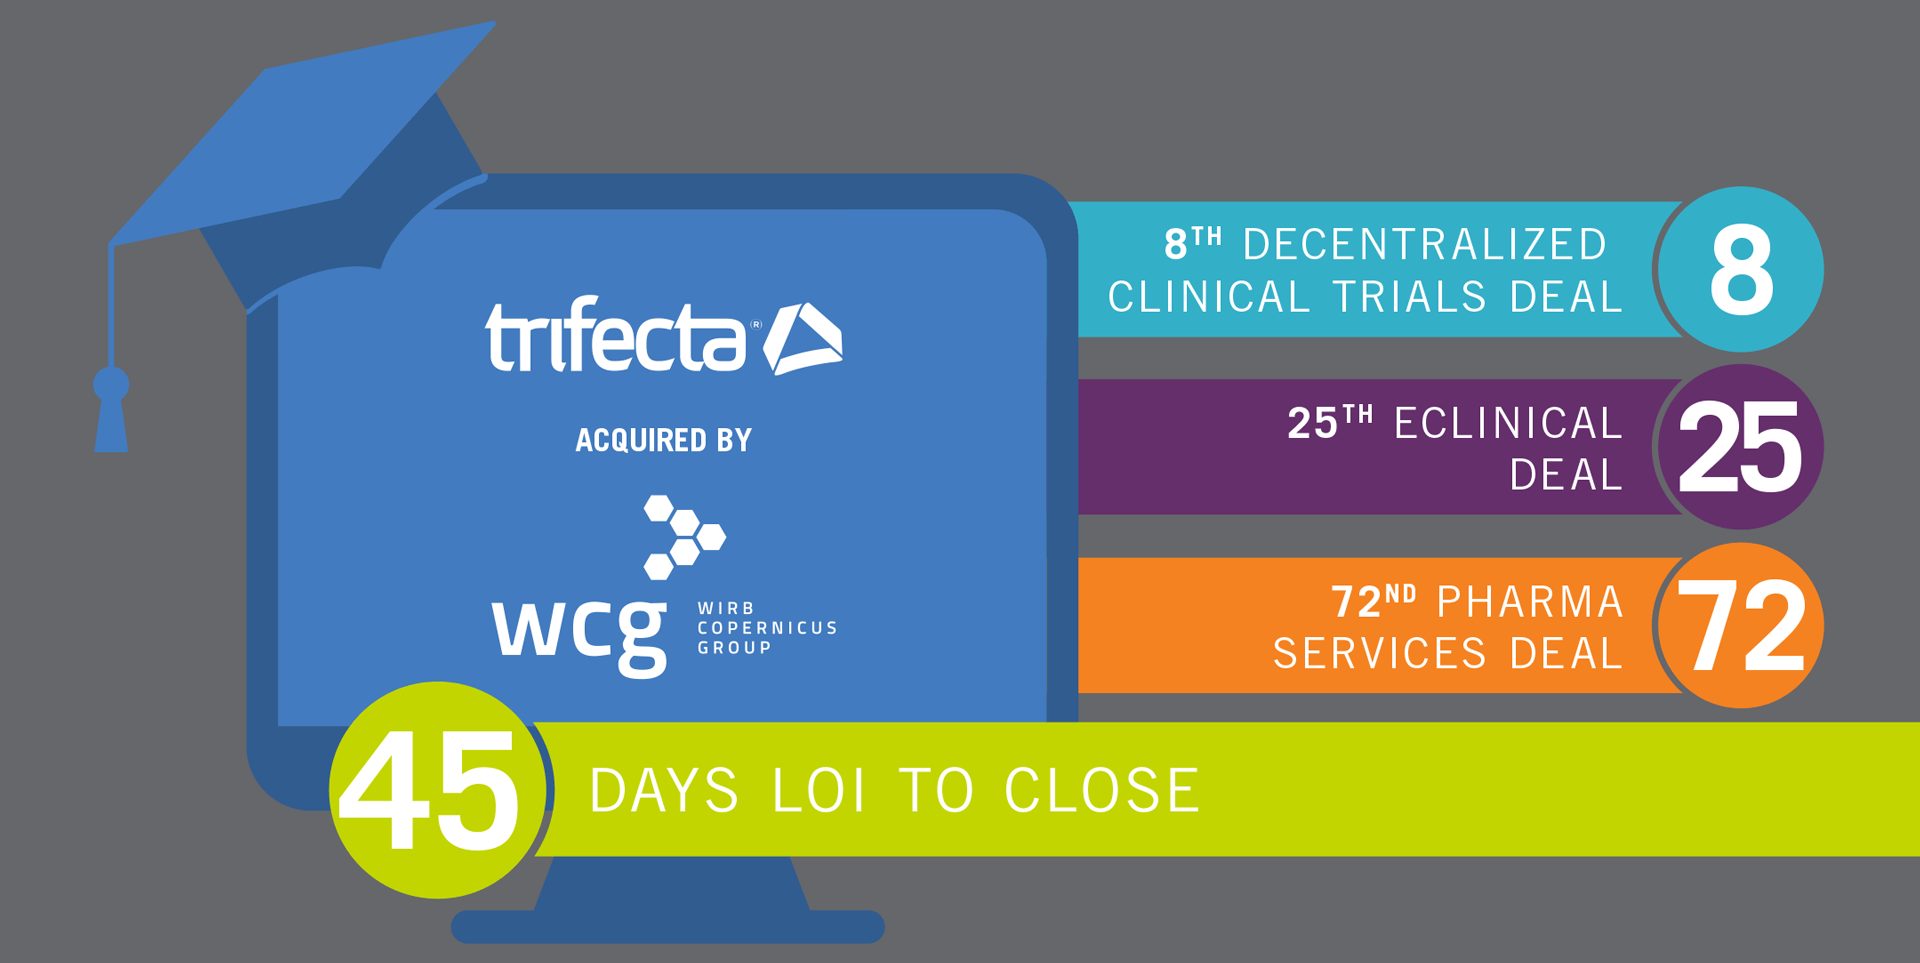 Trifecta Clinical was acquired by WCG